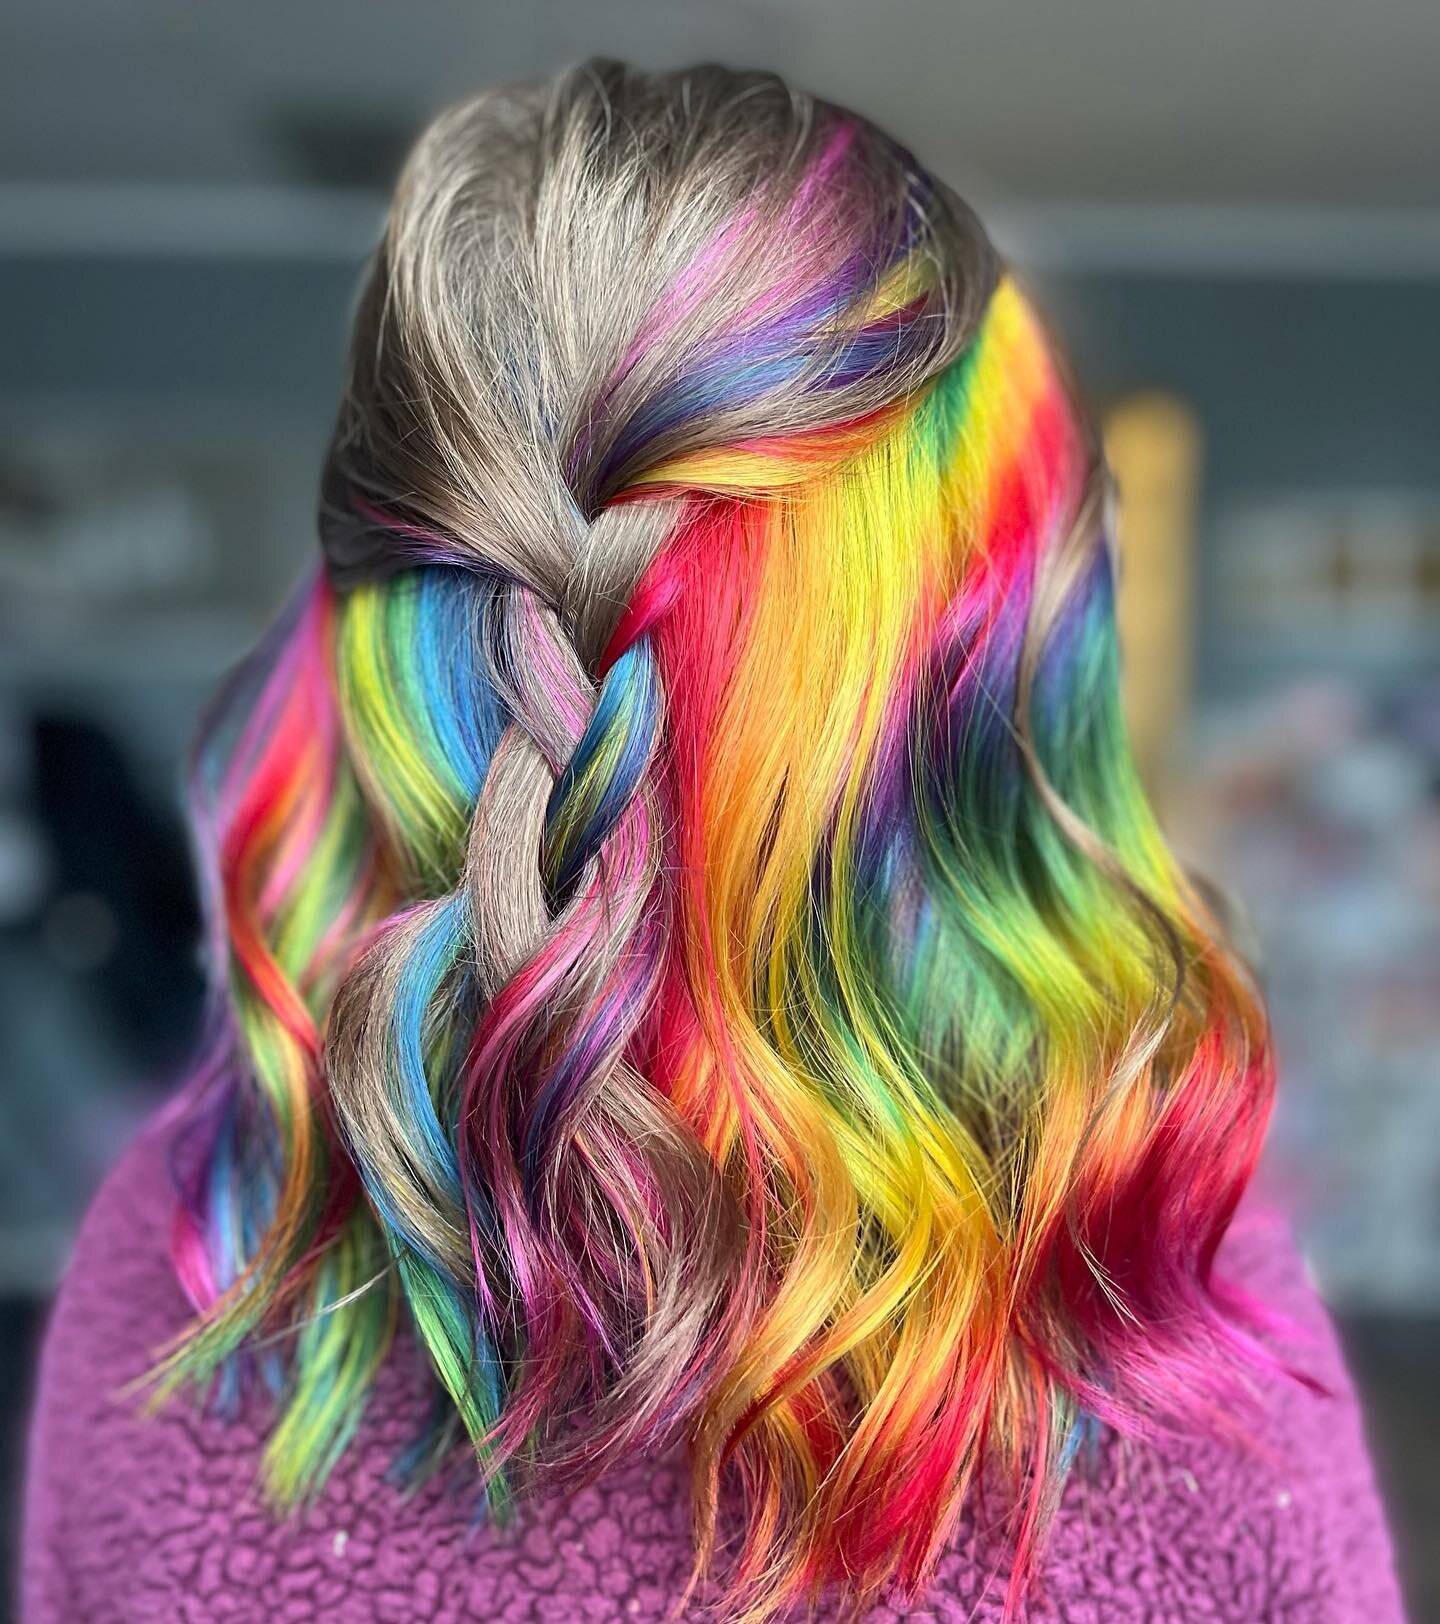 When the skies are grey, we needed a little brightness in our lives🌈🌈 @sarah.davis91 absolutely nailed this😍. #rainbow #haircolor #hairgoalsachieved #rainbowhairdontcare #wildehairboutiquesalon #wildehair #grimsbysalon #hairtransformation